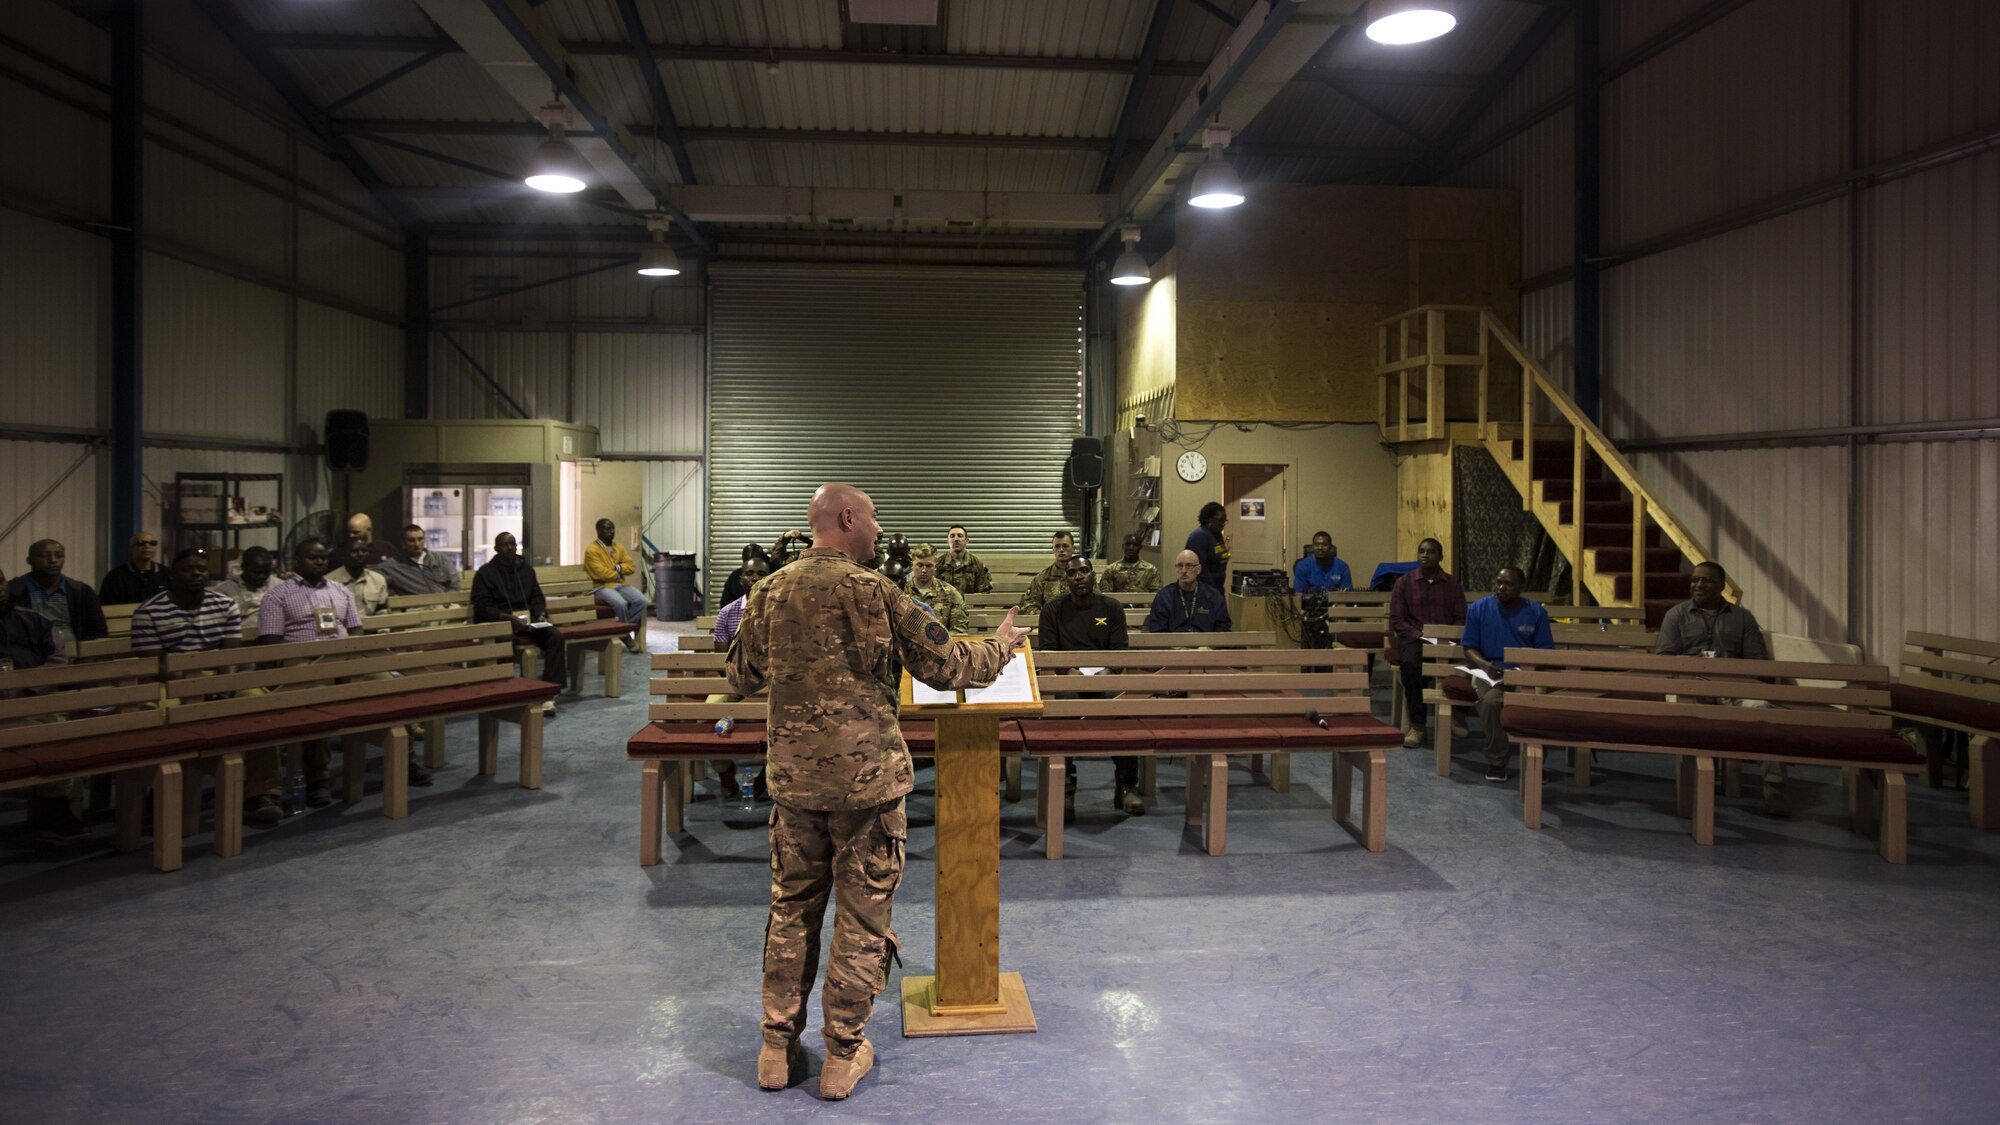 Churchgoers listen to Chaplain (Capt.) Timothy Tangen, 455th Air Expeditionary Wing chaplain, preach during a service Jan. 1, 2016 at the Warrior Chapel, Bagram Airfield, Afghanistan. Service members, Defense Department civilian employees and contractors attend chapel at one of several locations around Bagram to maintain spiritual resilience while deployed. (U.S. Air Force photo by Staff Sgt. Katherine Spessa)